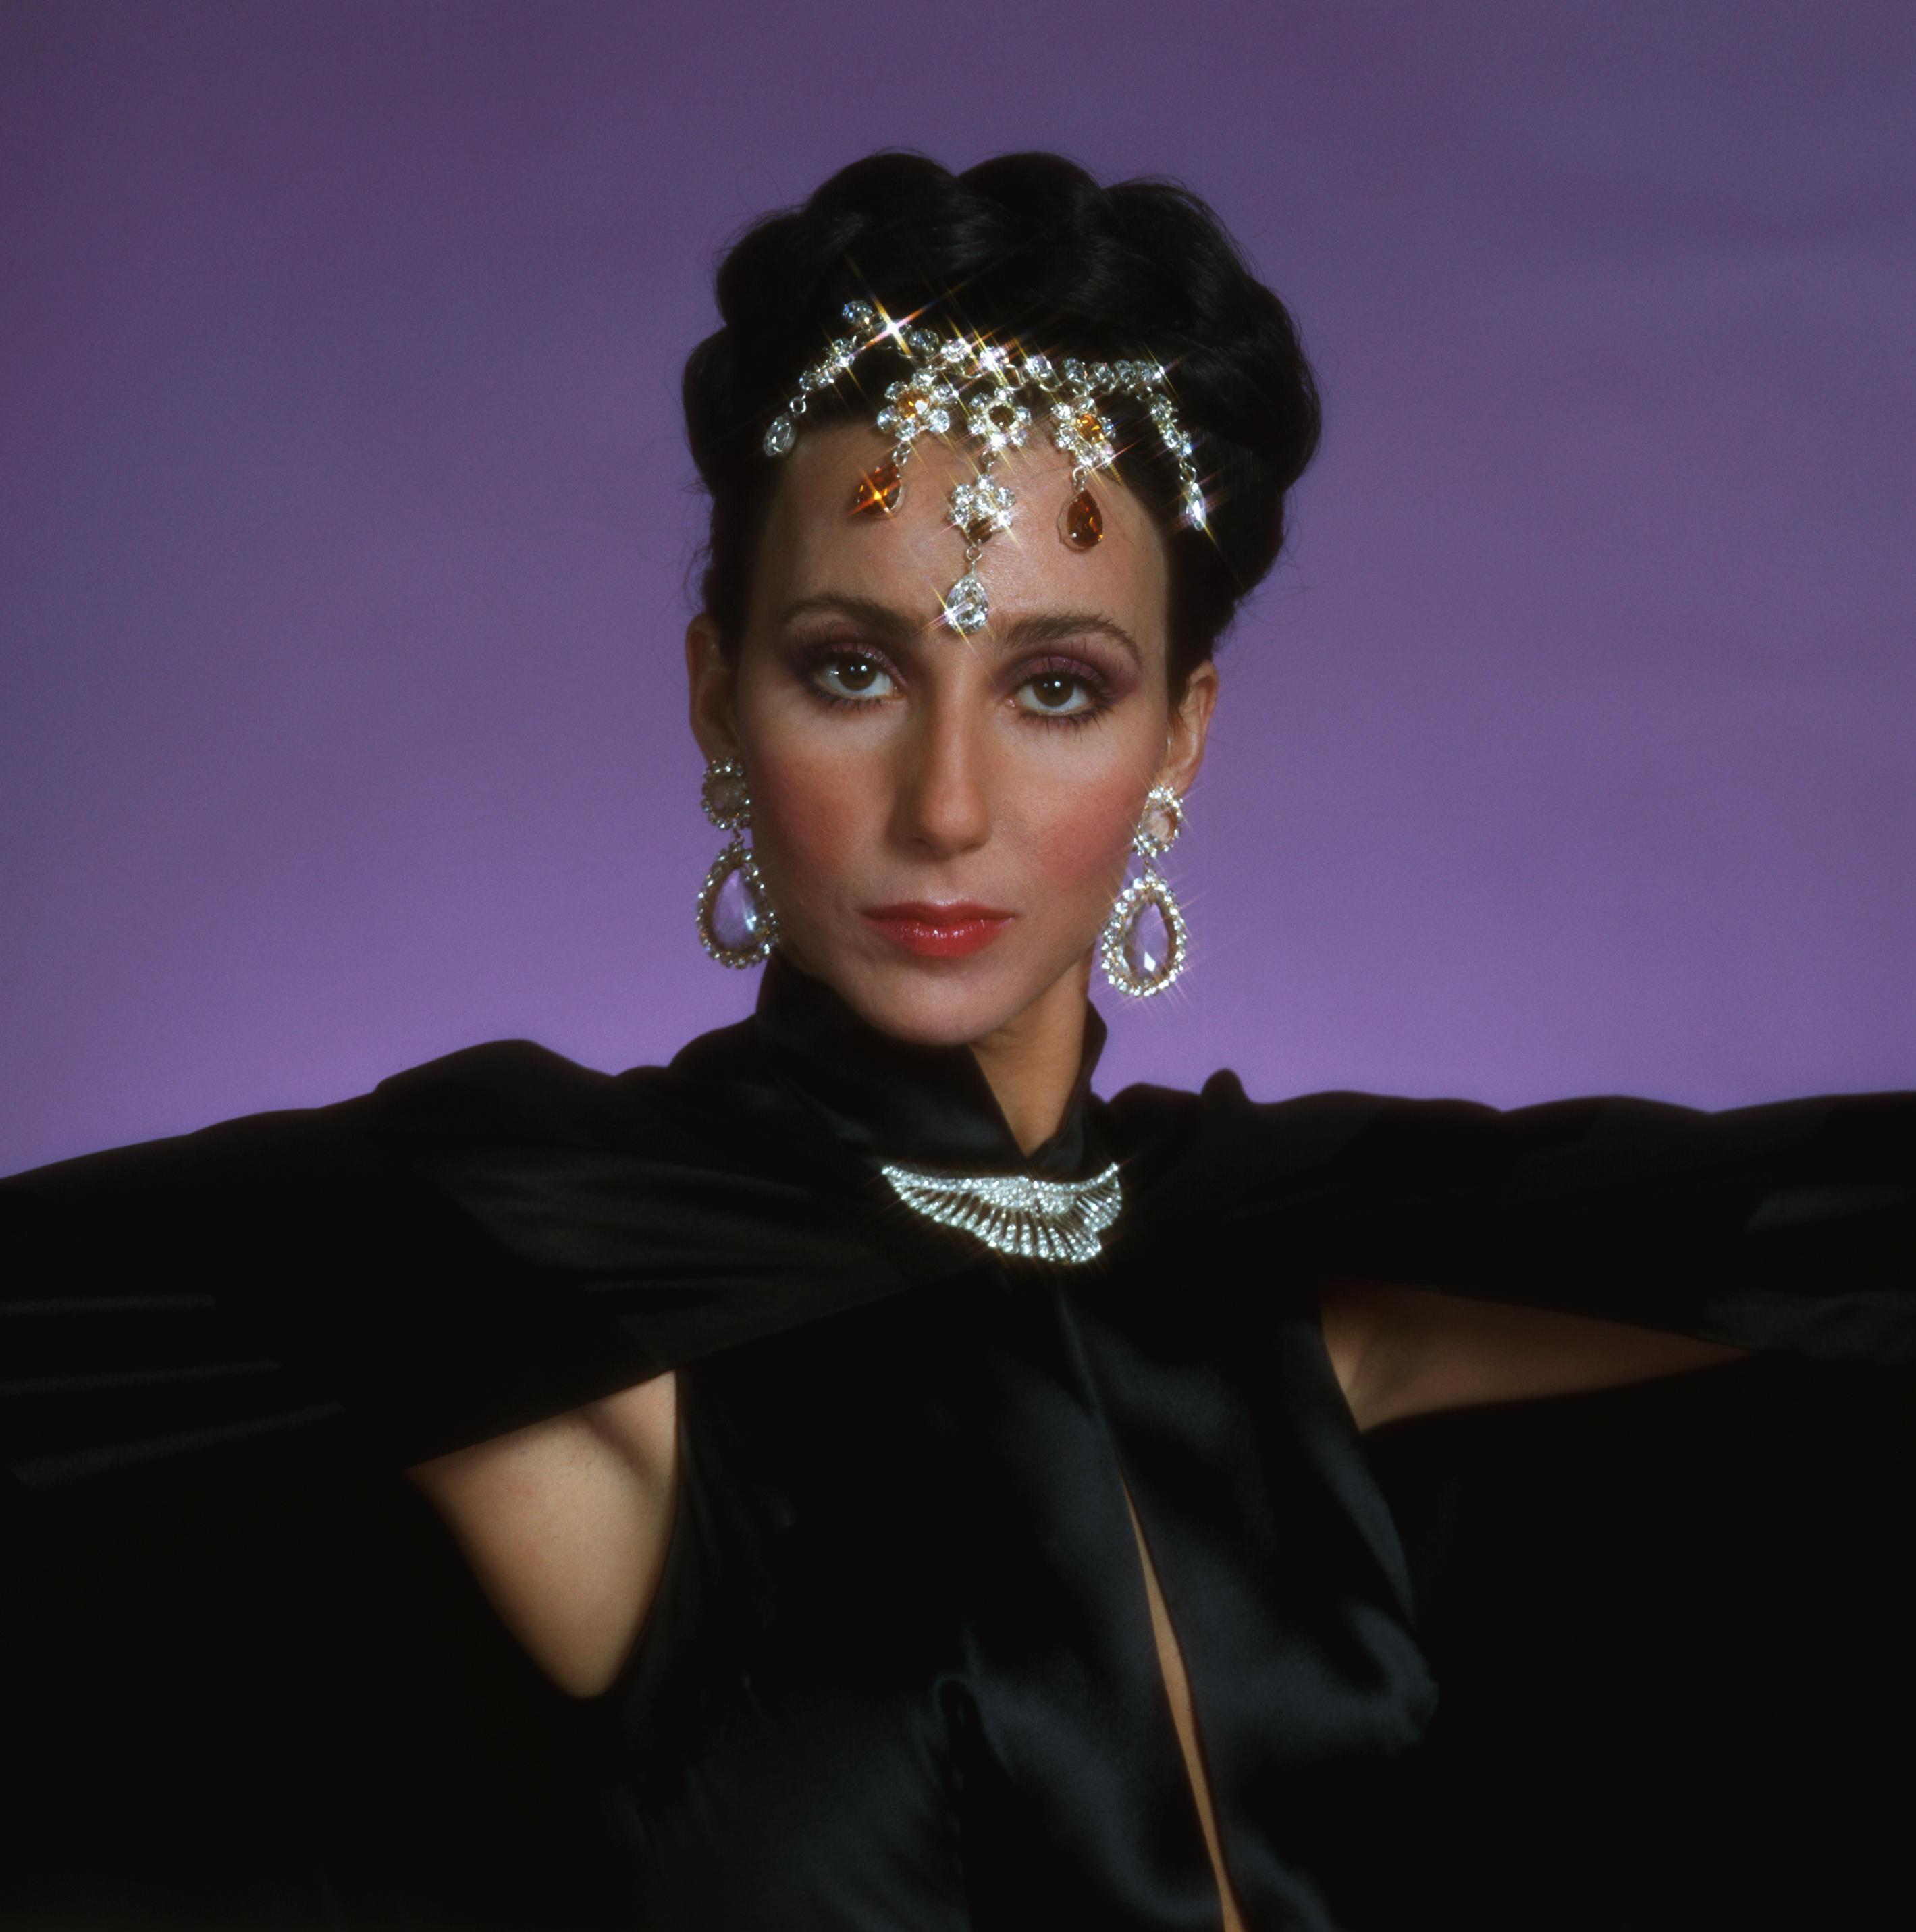 Cher poses for a headshot | Source: Getty Images